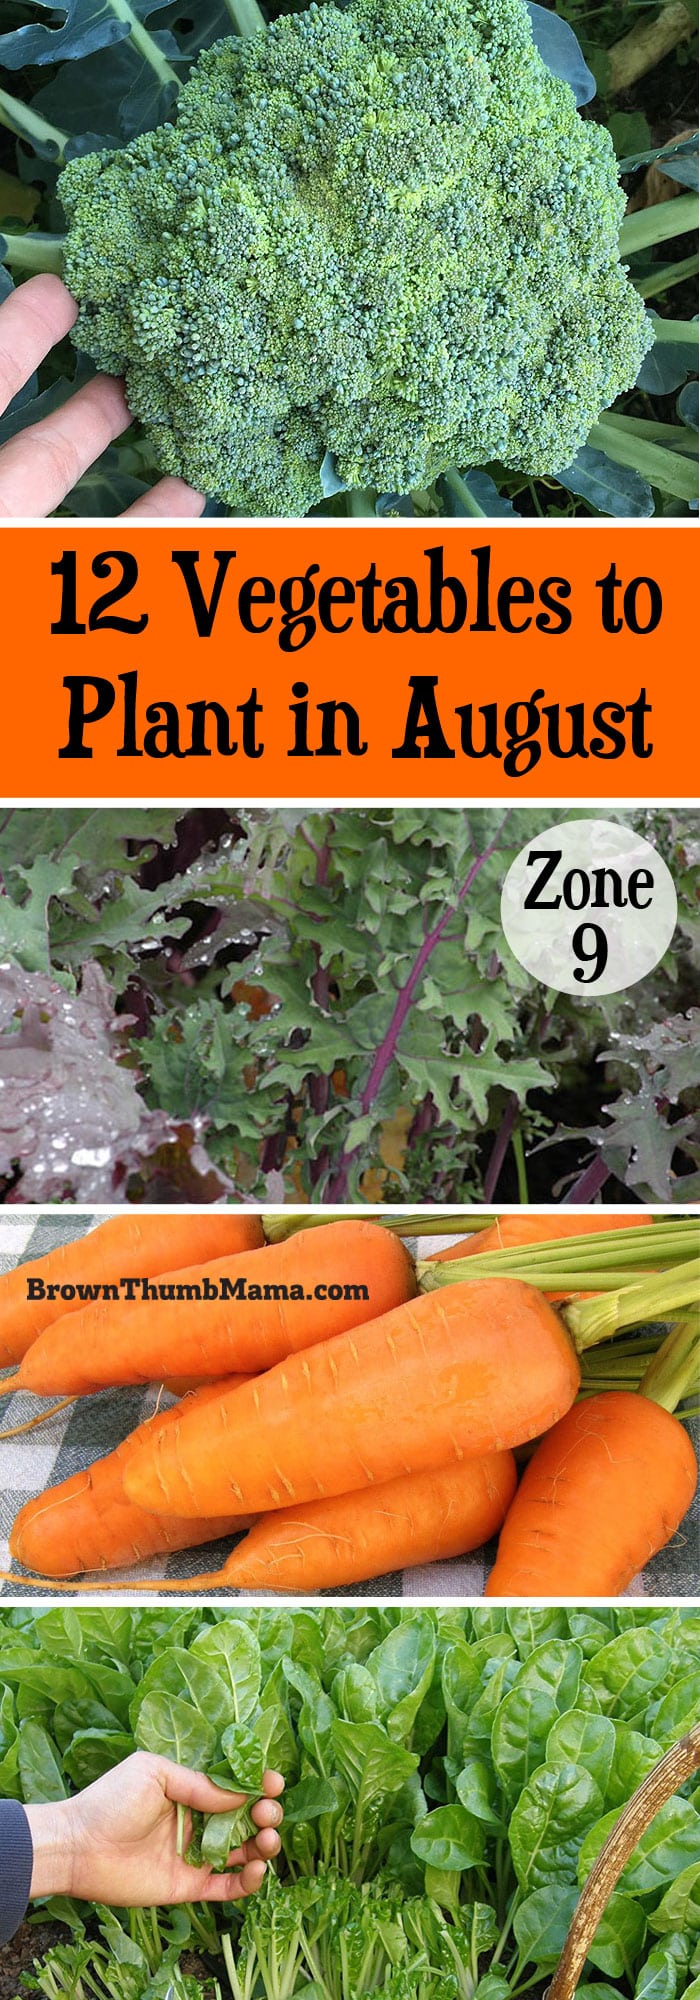 12 vegetables to plant in august {zone 9}